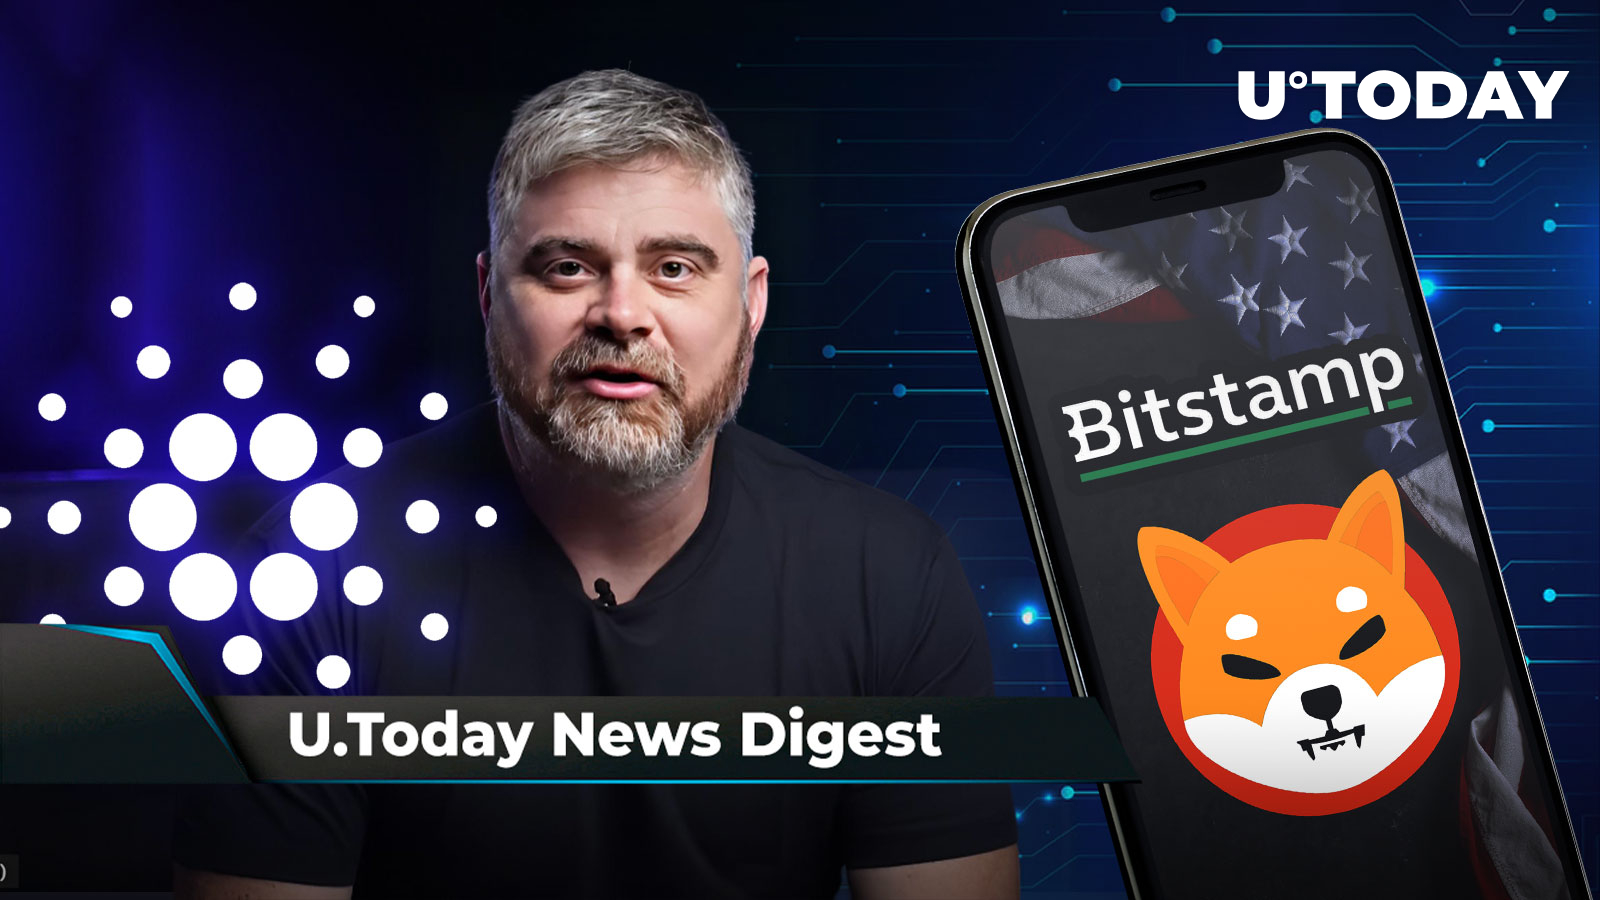 XRP Forms First “Golden Cross” in Months, BitBoy Says ADA Listing on FTX May Threaten Cardano, Bitstamp Brings SHIB to U.S.: Crypto News Digest by U.Today